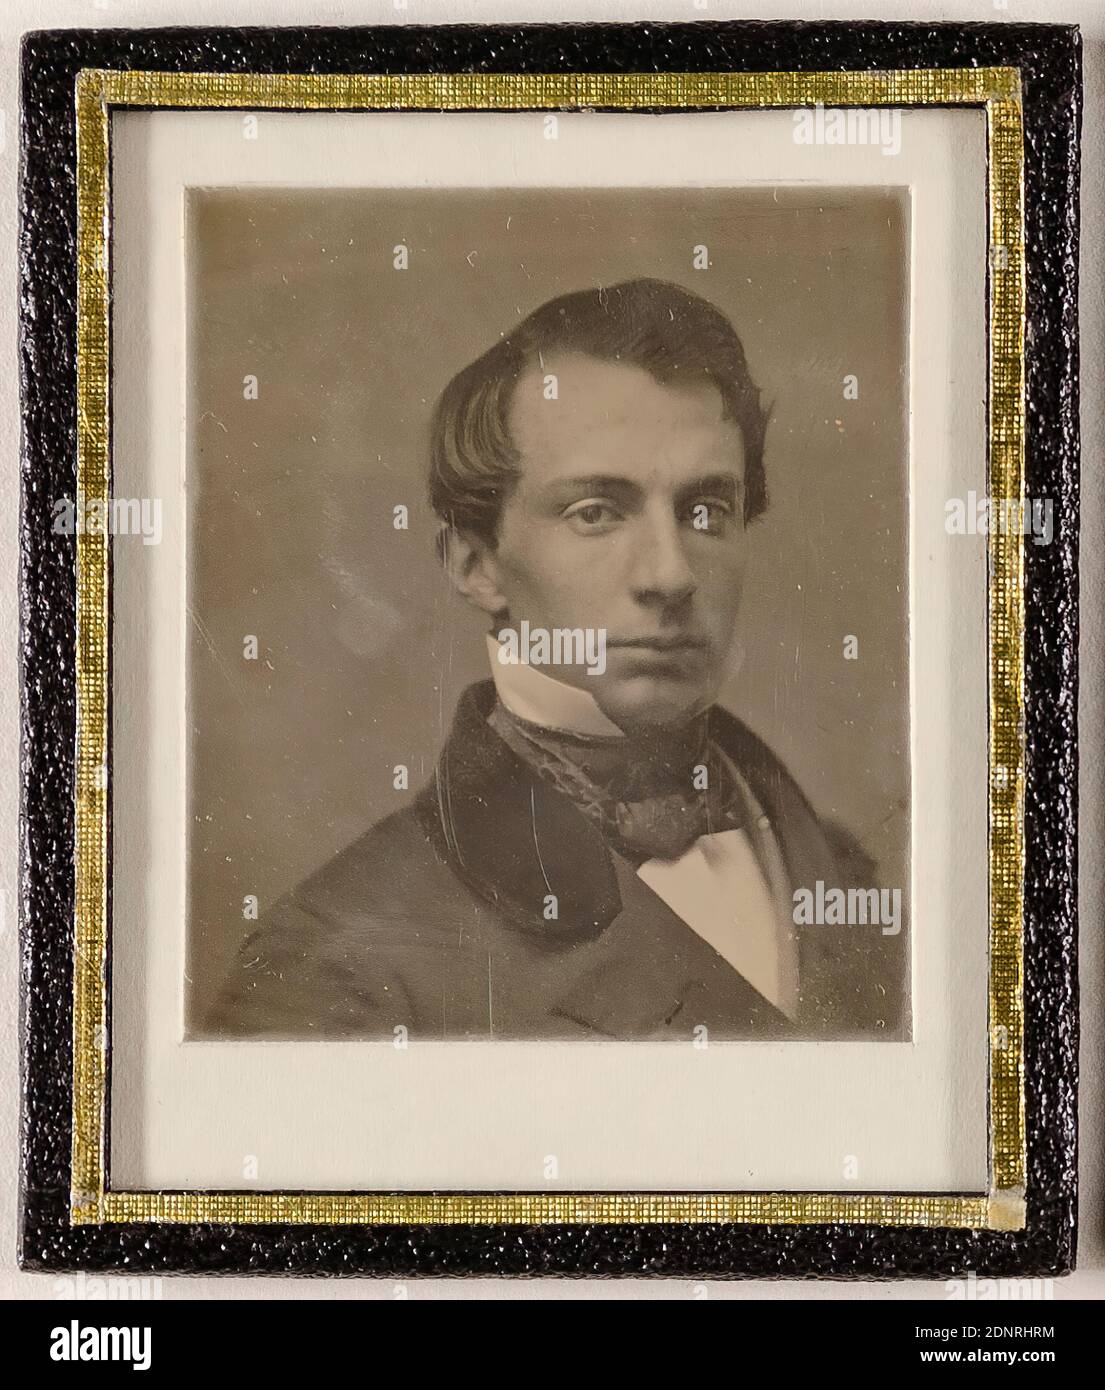 Southworth & Hawes, Young Man, Daguerreotype, Image Size: Height: 5,80 cm; Width: 4,90 cm, in ink: photographer, title, stamp of the Hamburg State Photographic Agency, portrait photography, man, bust, three-quarter view Stock Photo